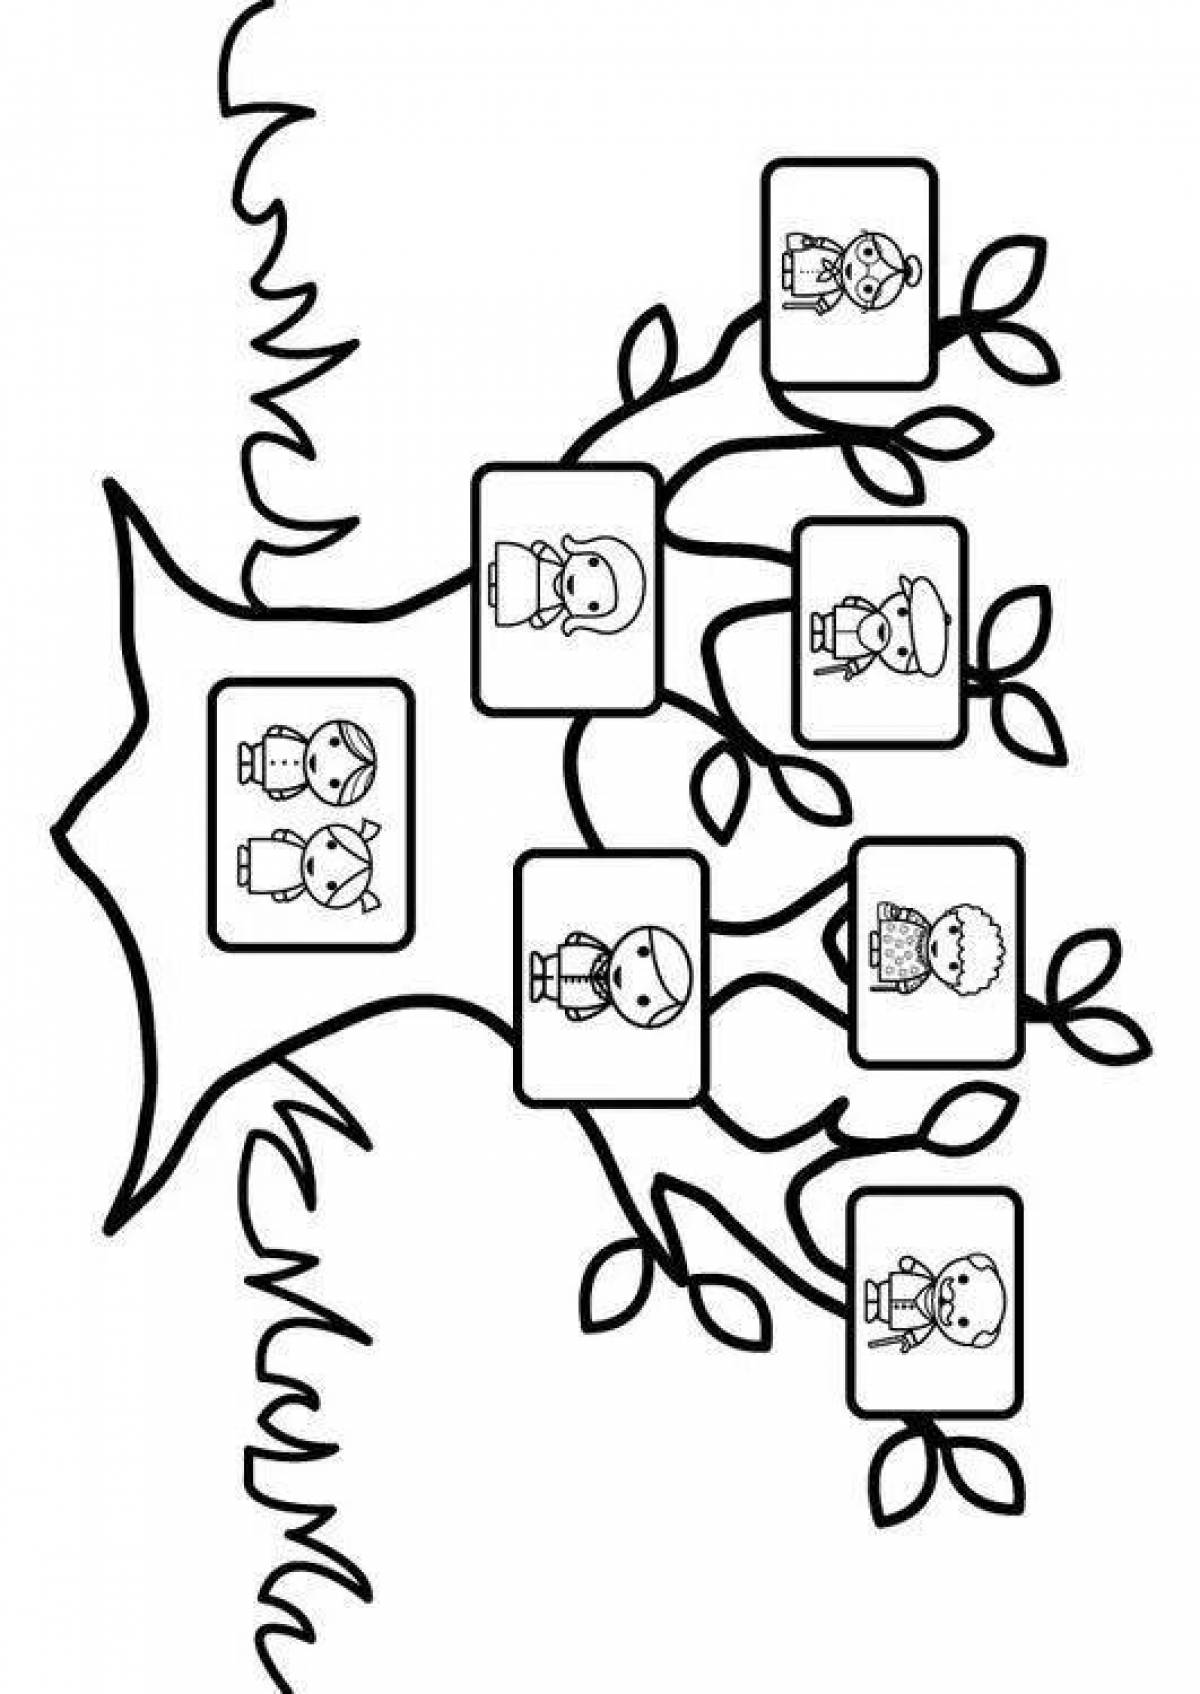 Regal coloring page universal tree